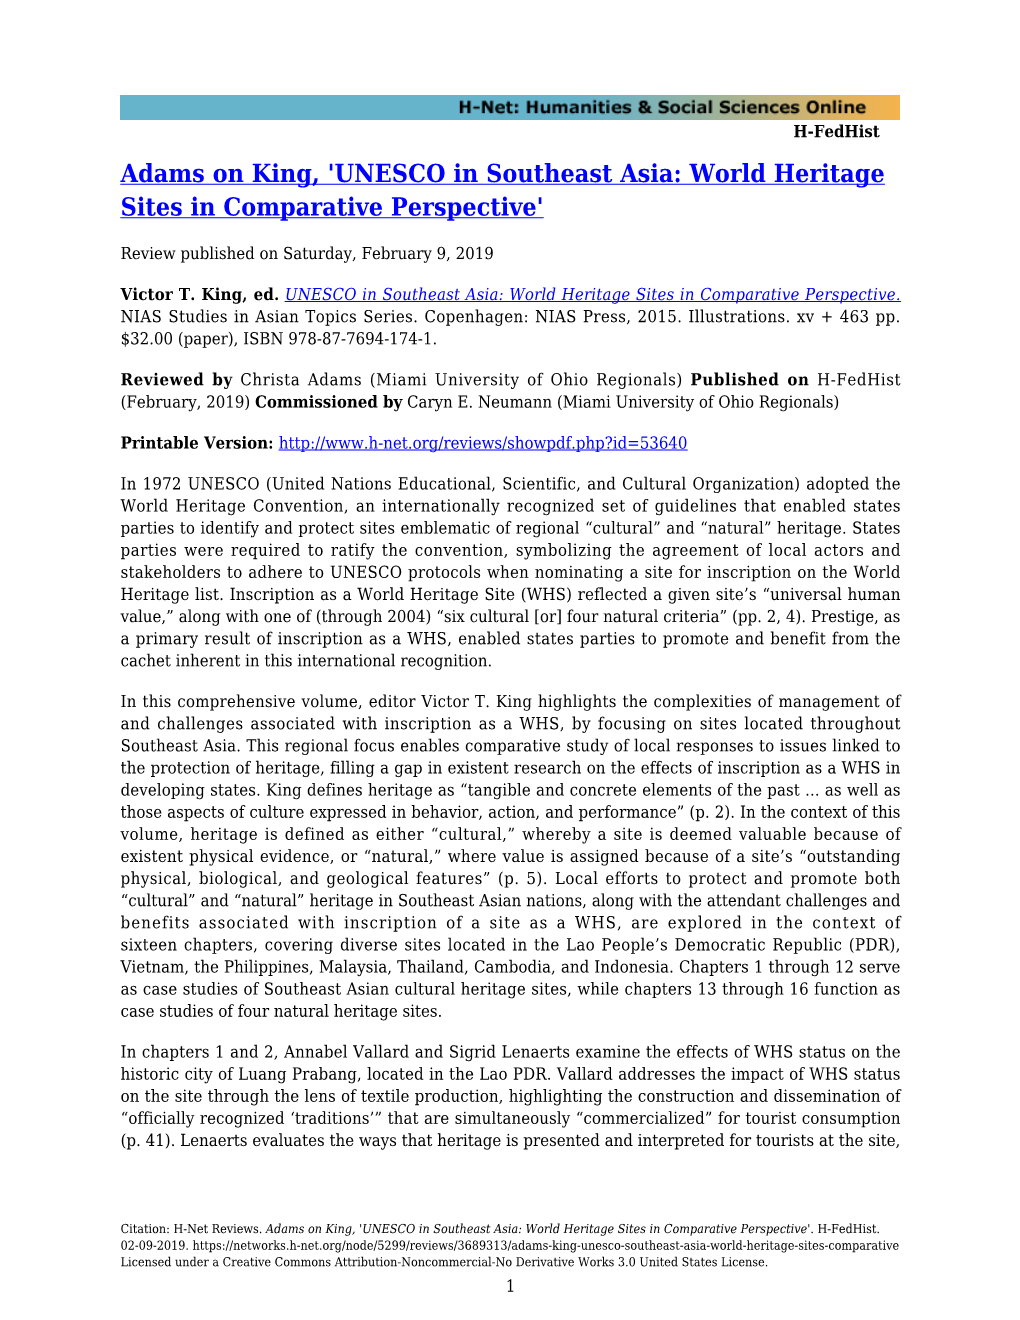 UNESCO in Southeast Asia: World Heritage Sites in Comparative Perspective'